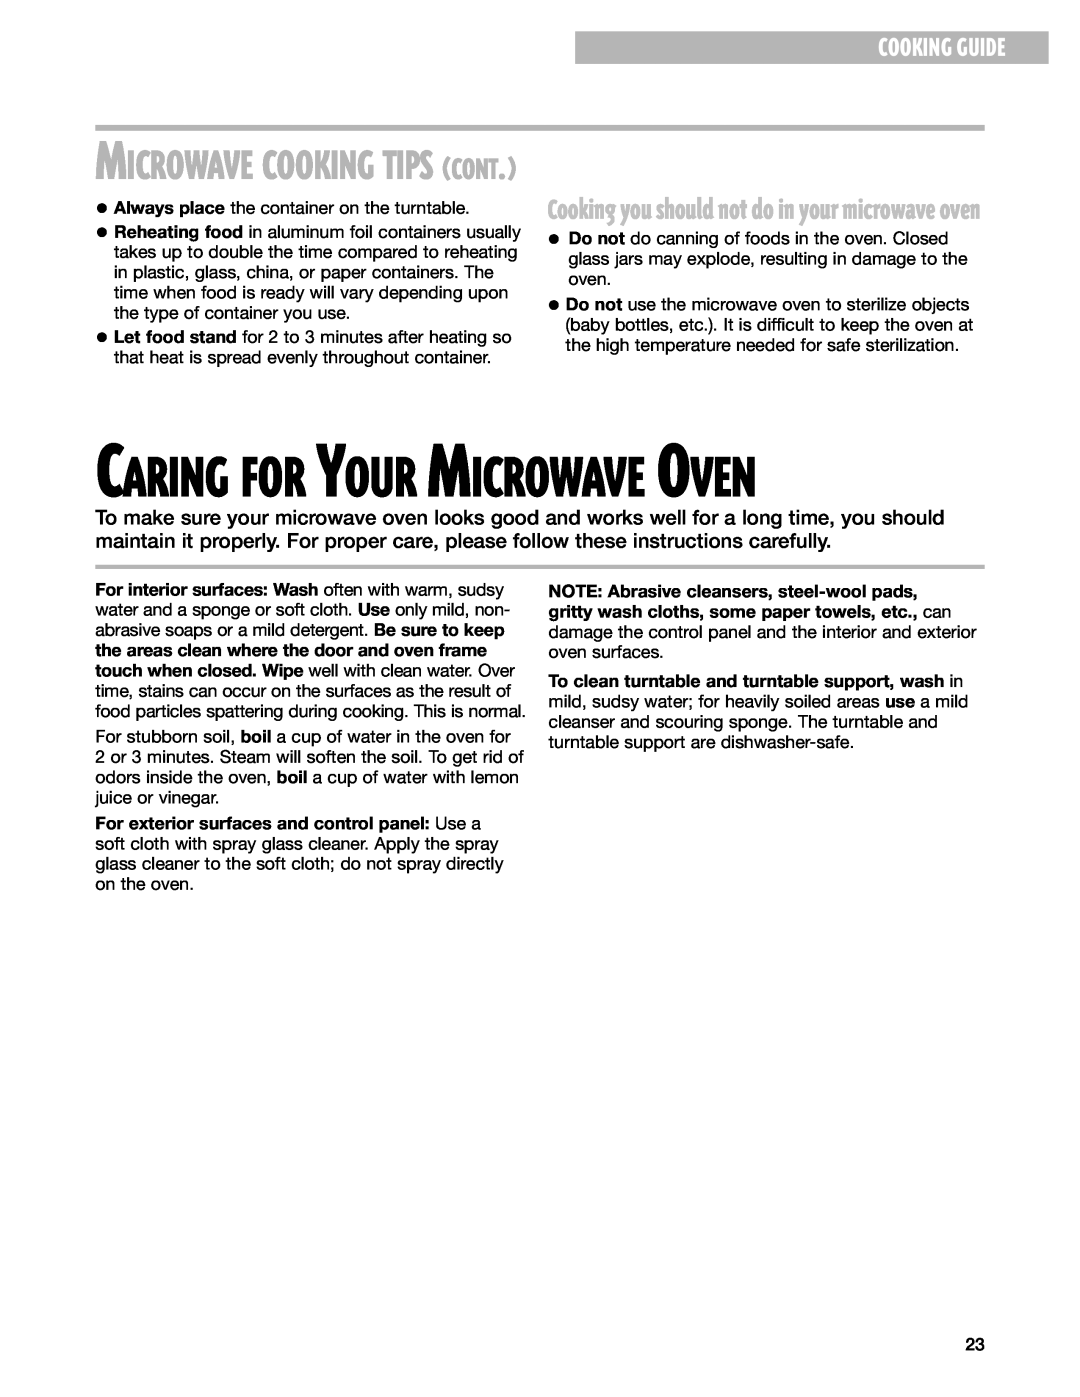 Whirlpool MT1100SH installation instructions Caring For Your Microwave Oven, Microwave Cooking Tips Cont, Cooking Guide 